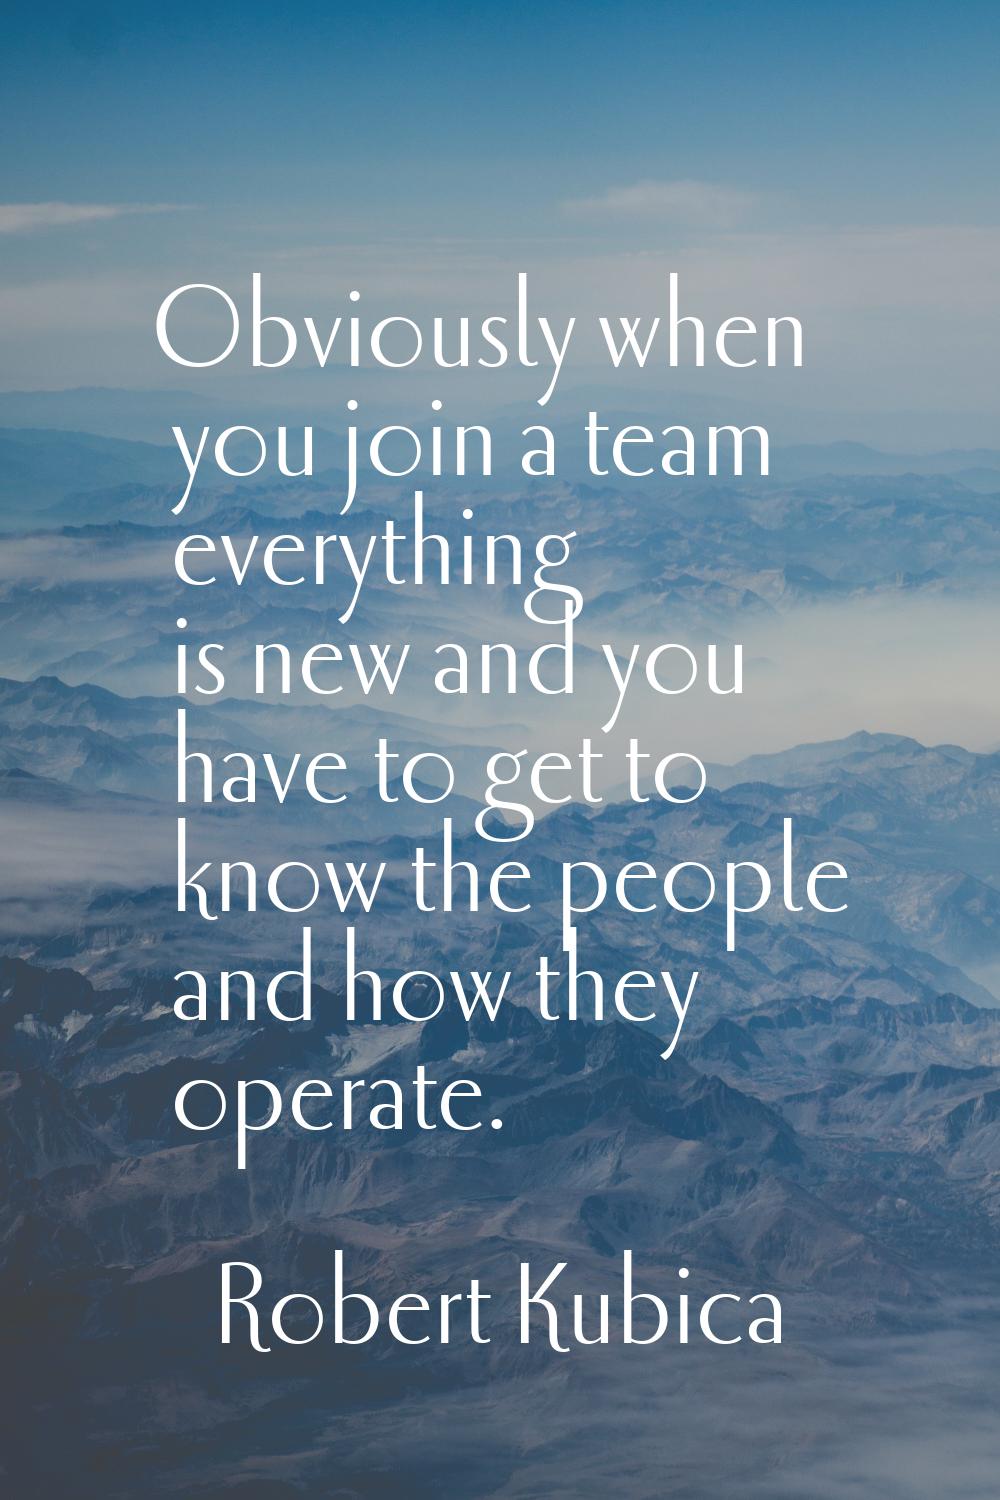 Obviously when you join a team everything is new and you have to get to know the people and how the